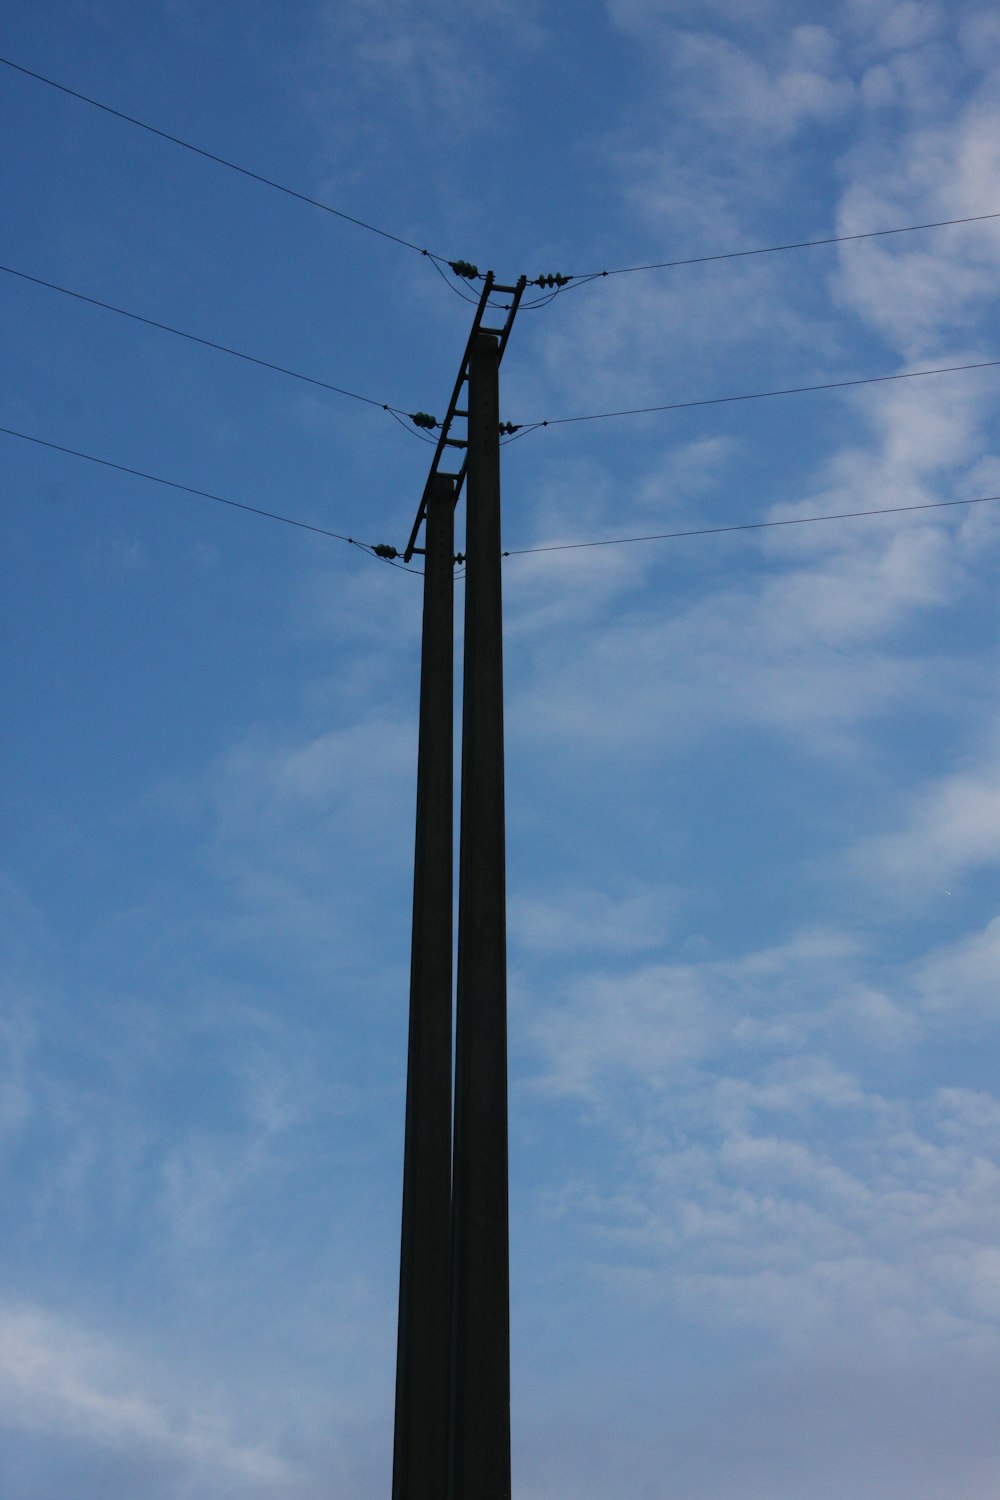 a tall metal pole with power lines above it